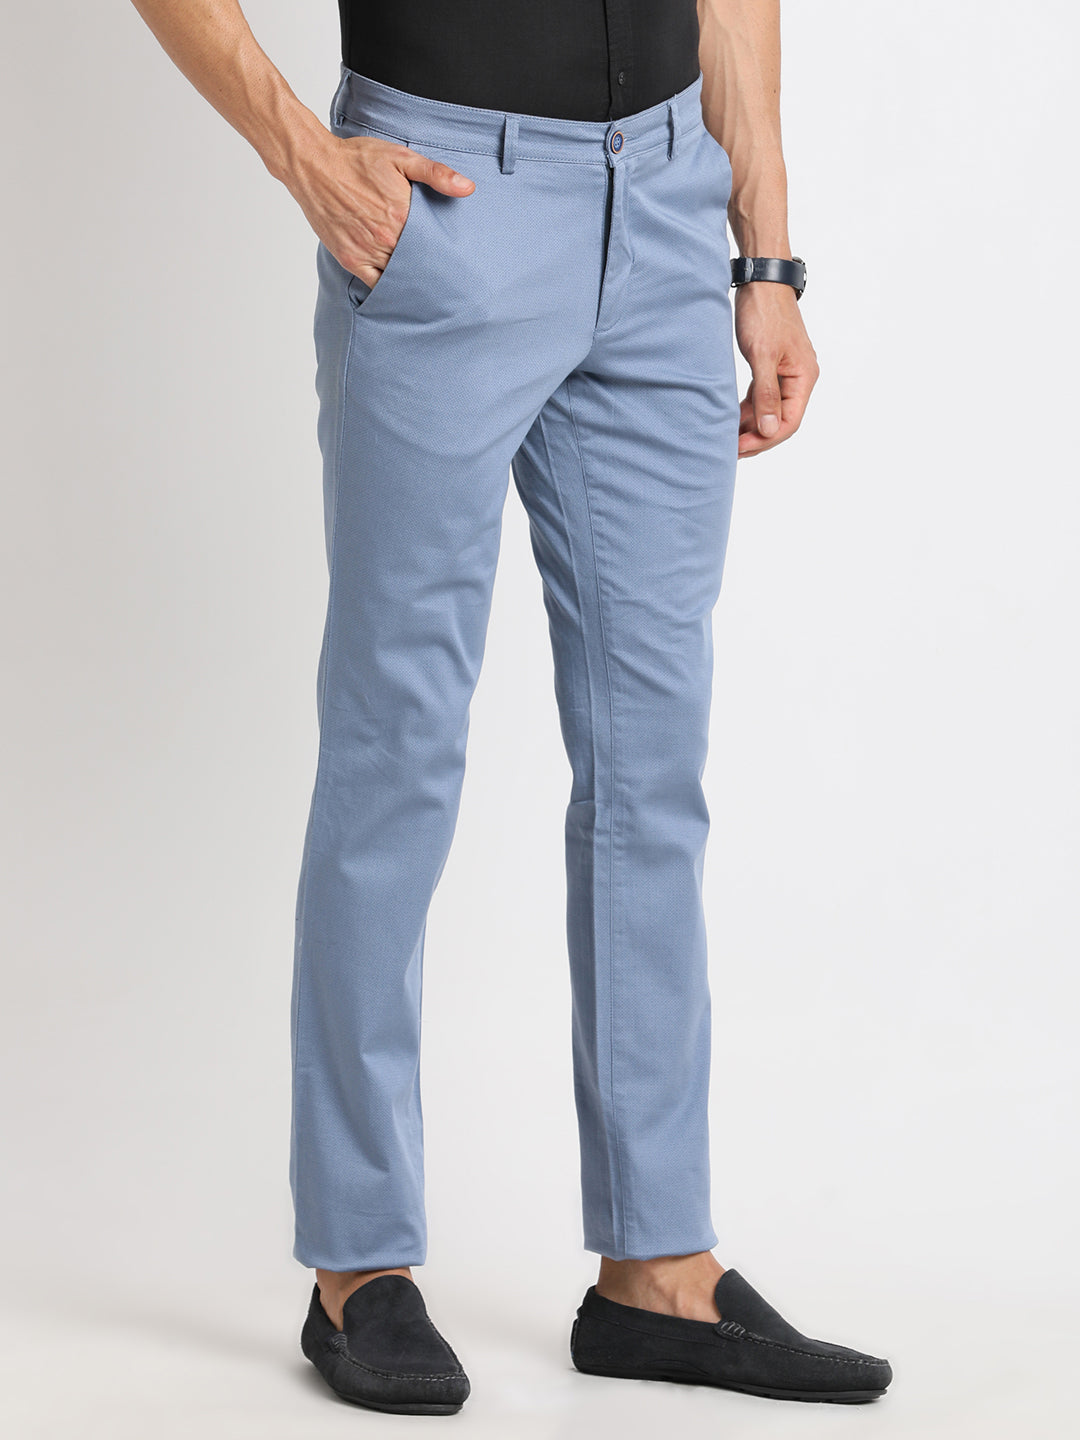 Cotton Stretch Light Blue Printed Narrow Fit Flat Front Casual Trouser